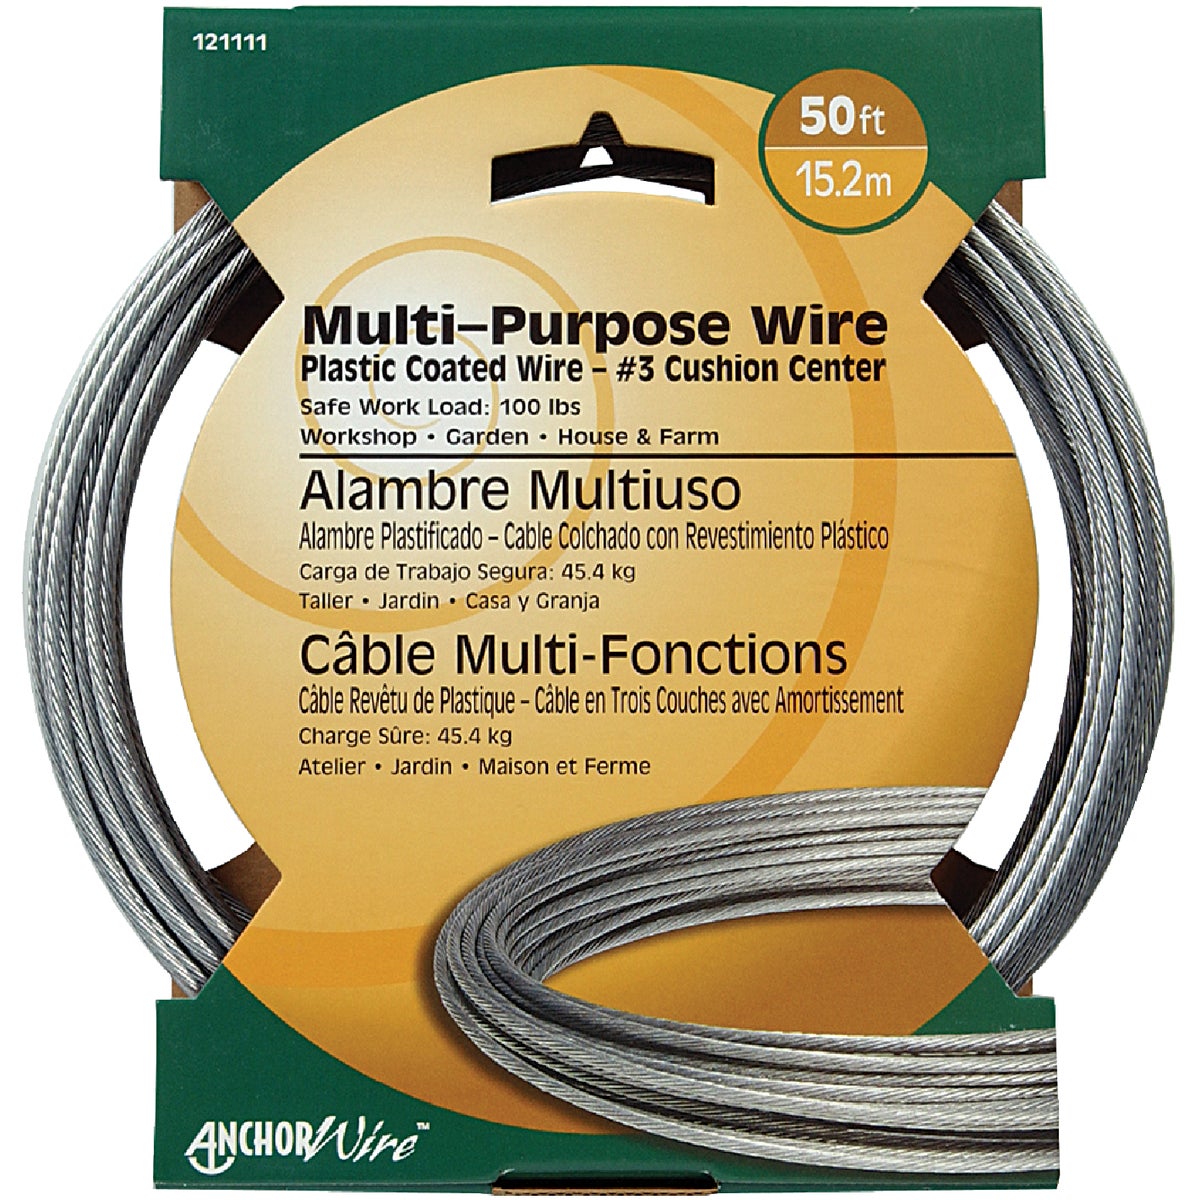 Item 601300, Cushion center multi-purpose wire is ideal for workshop, garden, house, and